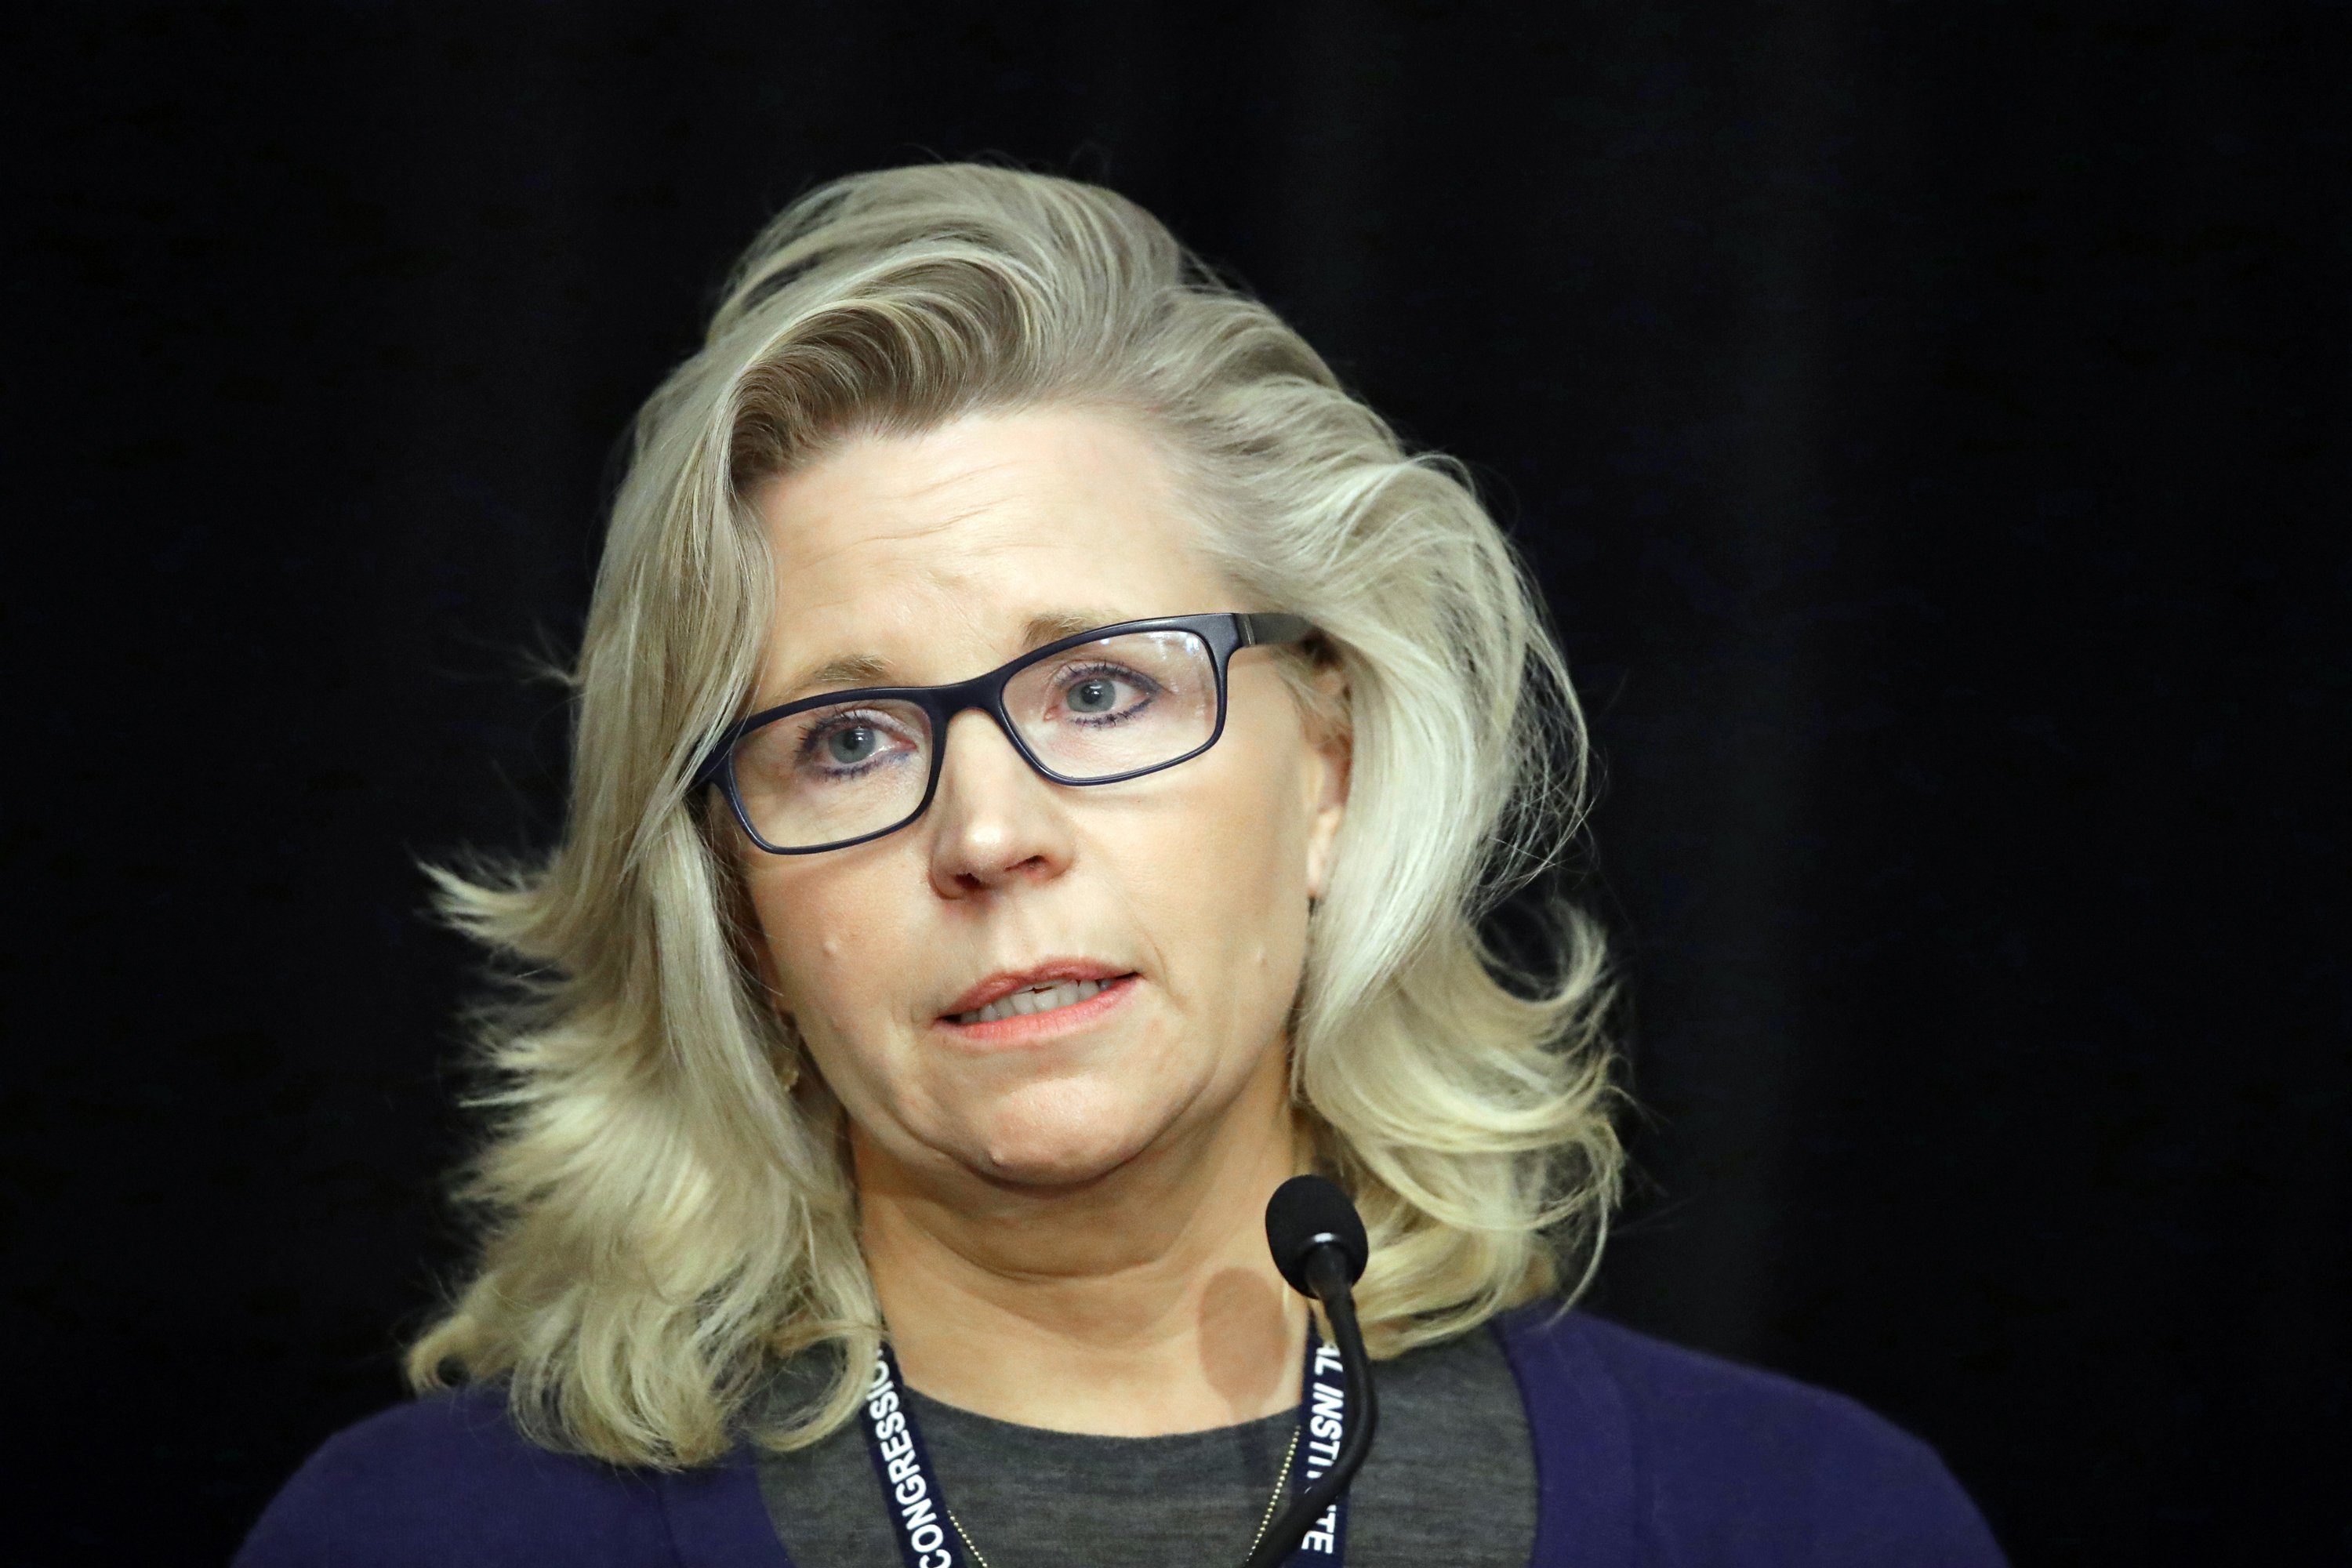 Liz Cheney Poised For Ascent Into Republican Leadership liz cheney poised for ascent into